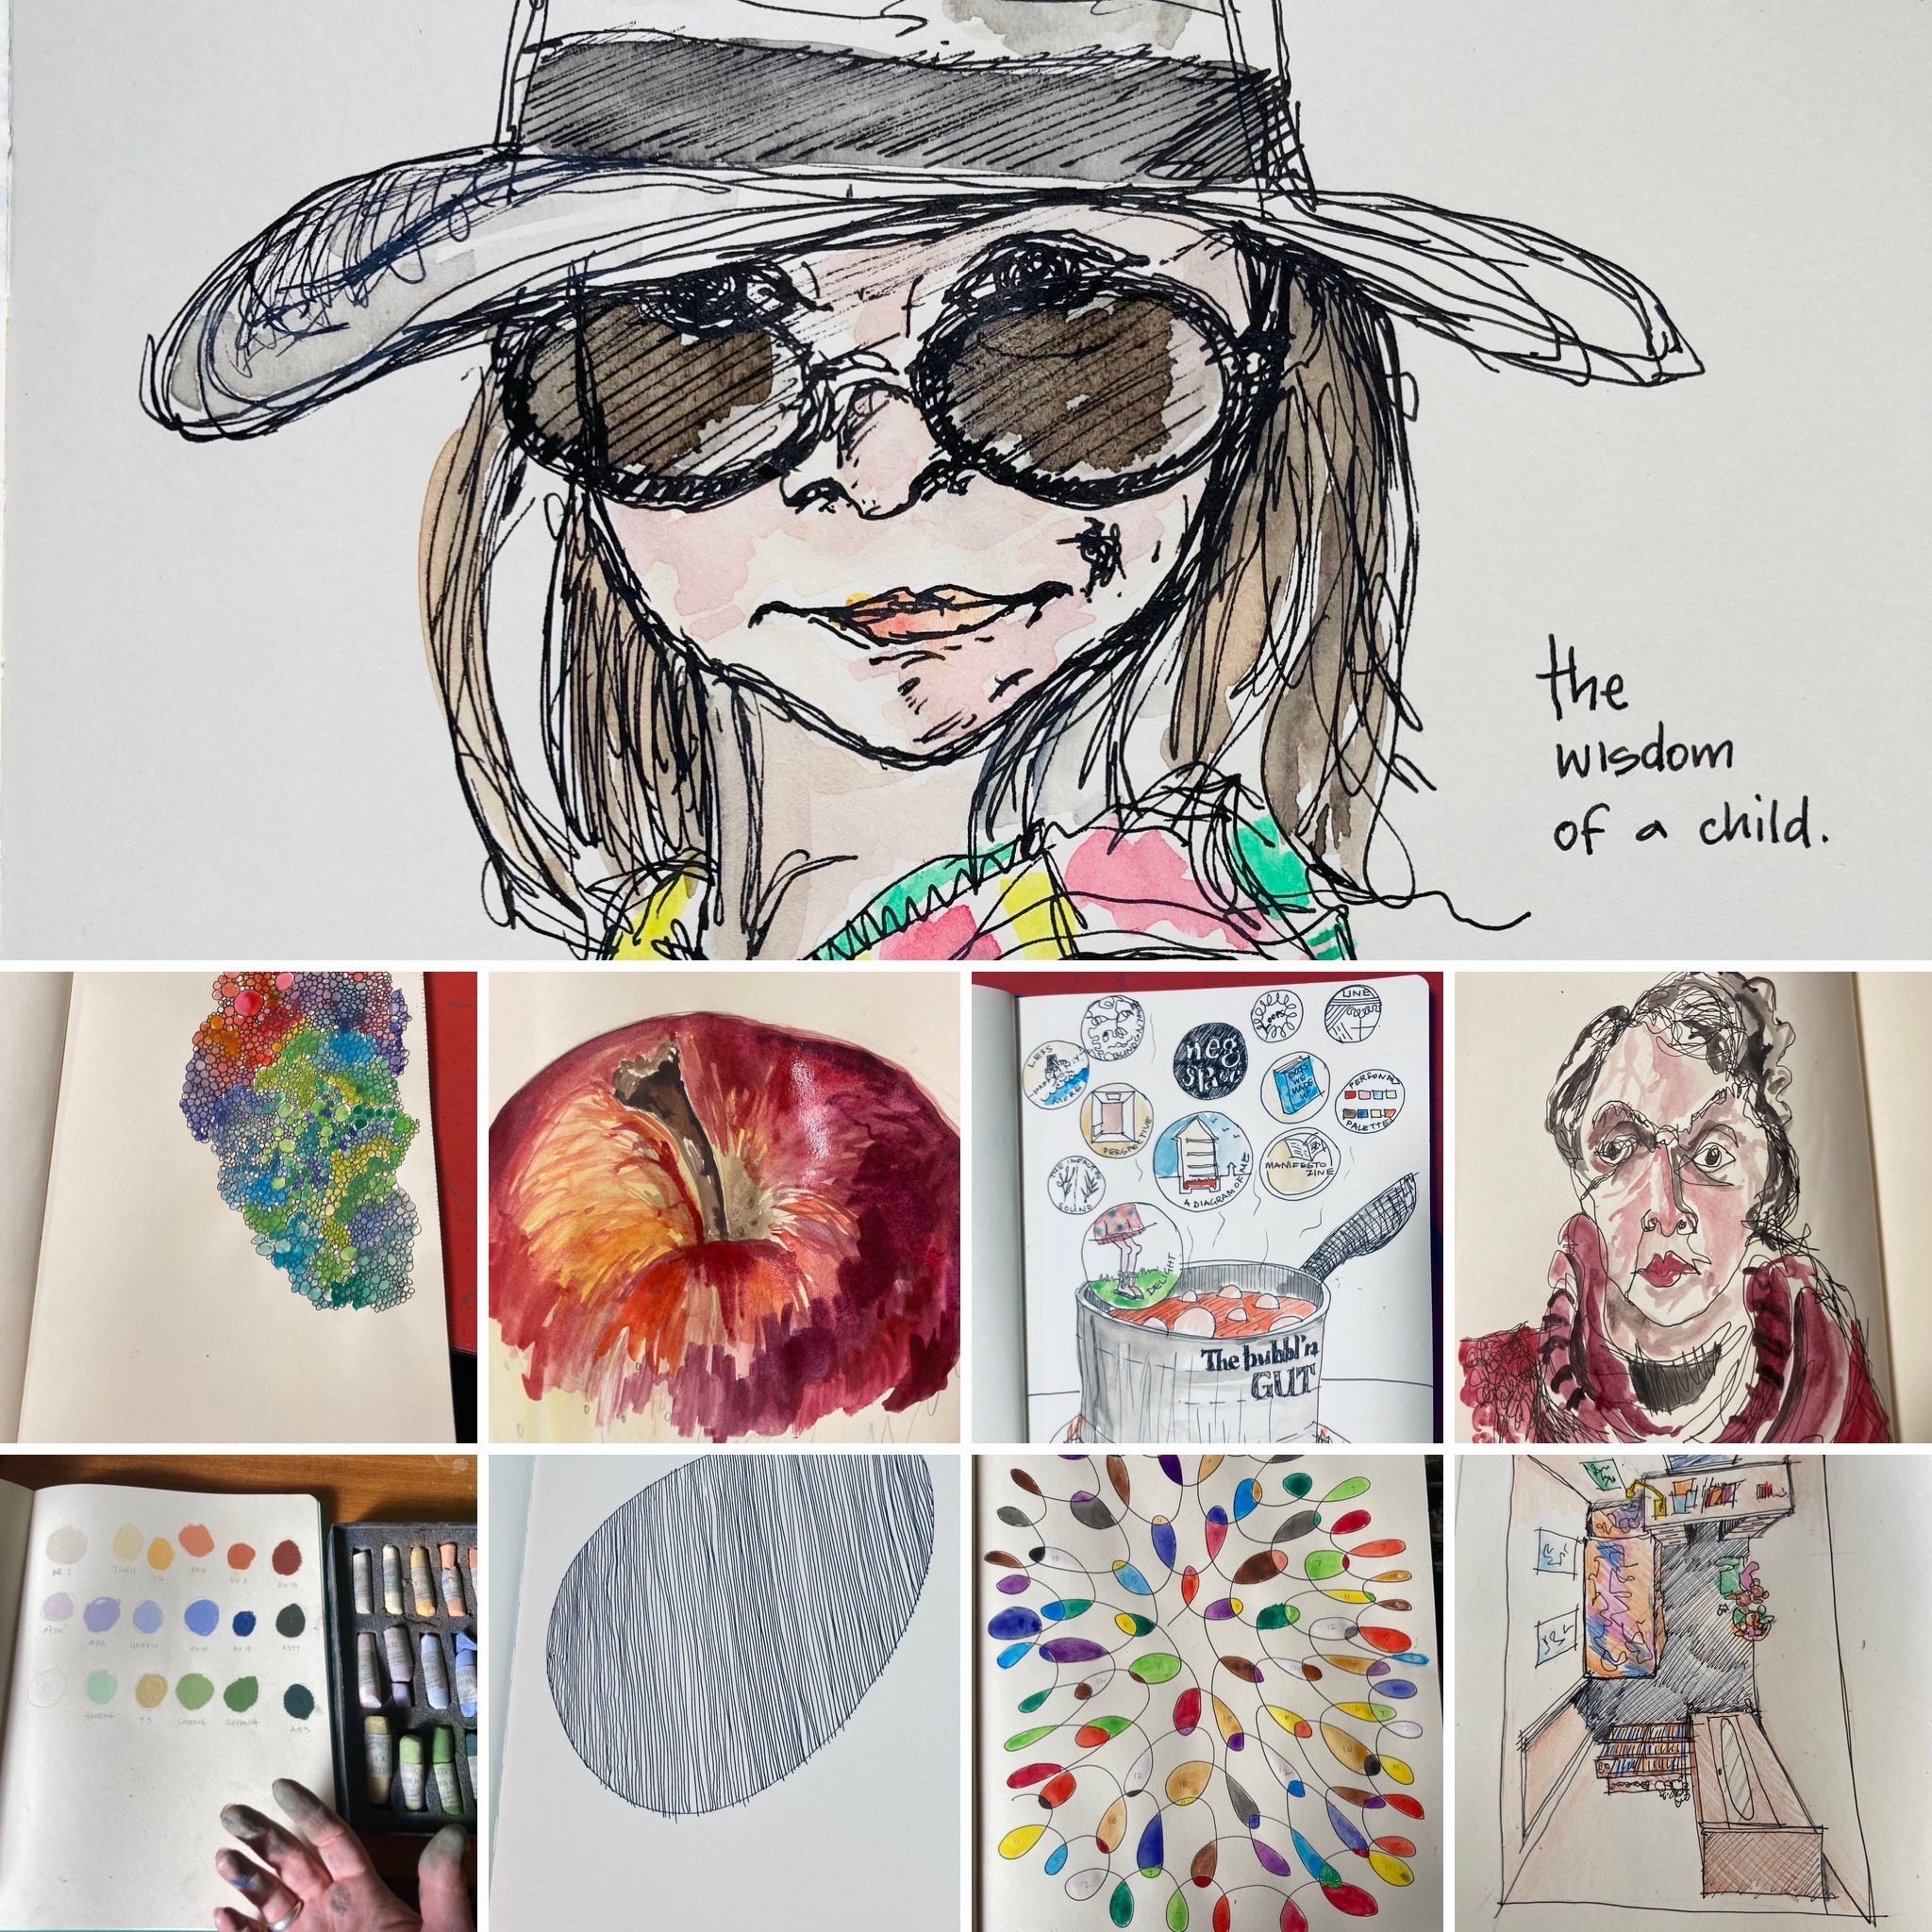 Editor's Dispatch: New Year, New Sketchbook